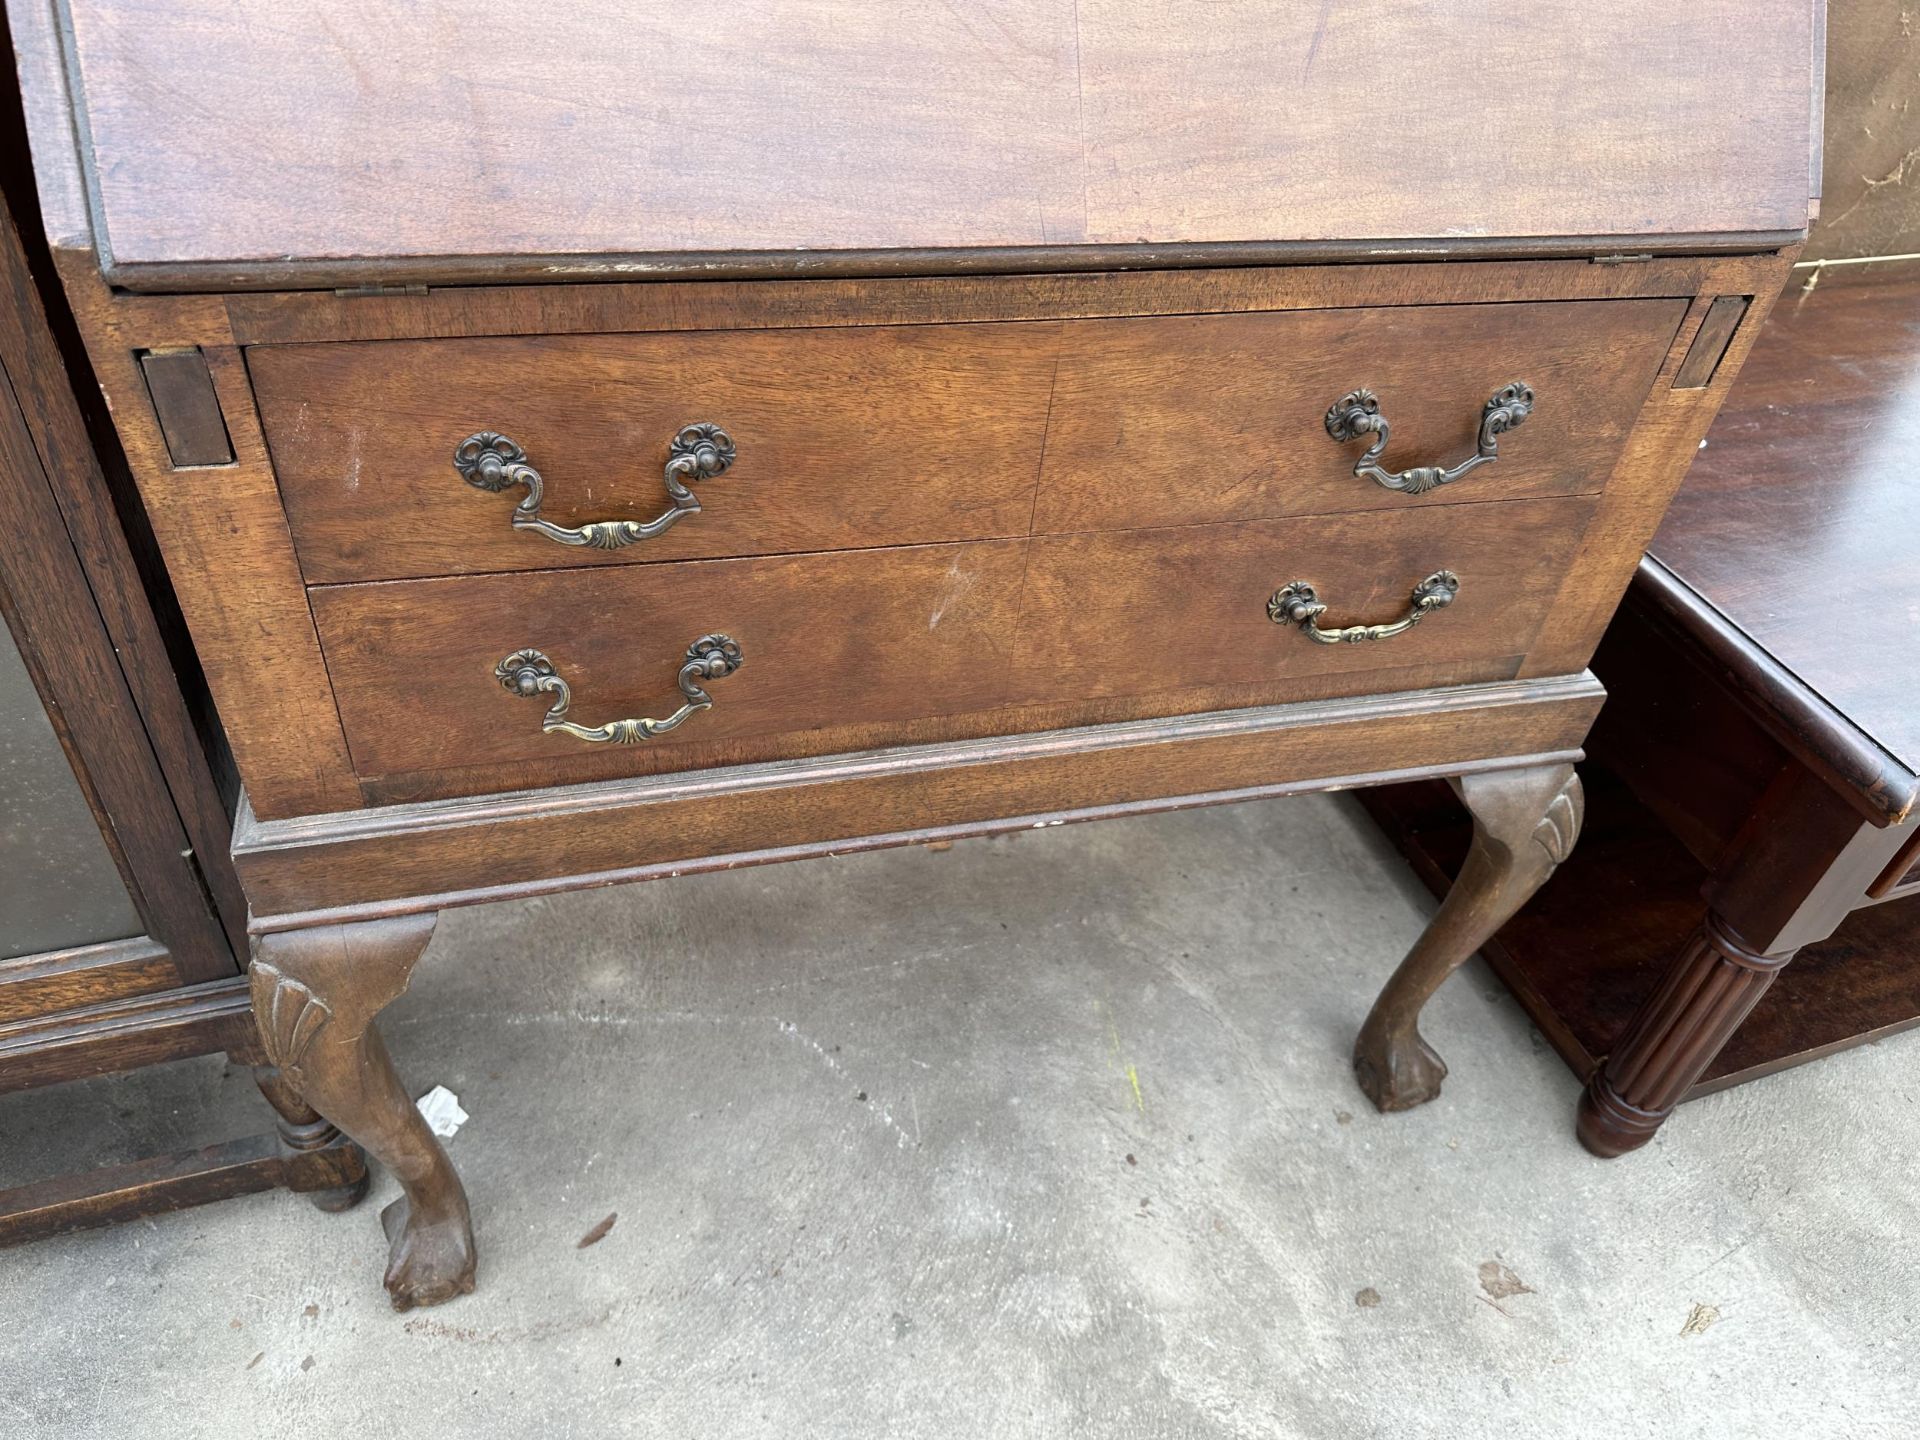 AN EARLY TWENTIETH CENTURY MAHOGANY BUREAU ON CABRIOLE LEGS WITH BALL AND CLAW FEET, 30" WIDE - Image 3 of 4